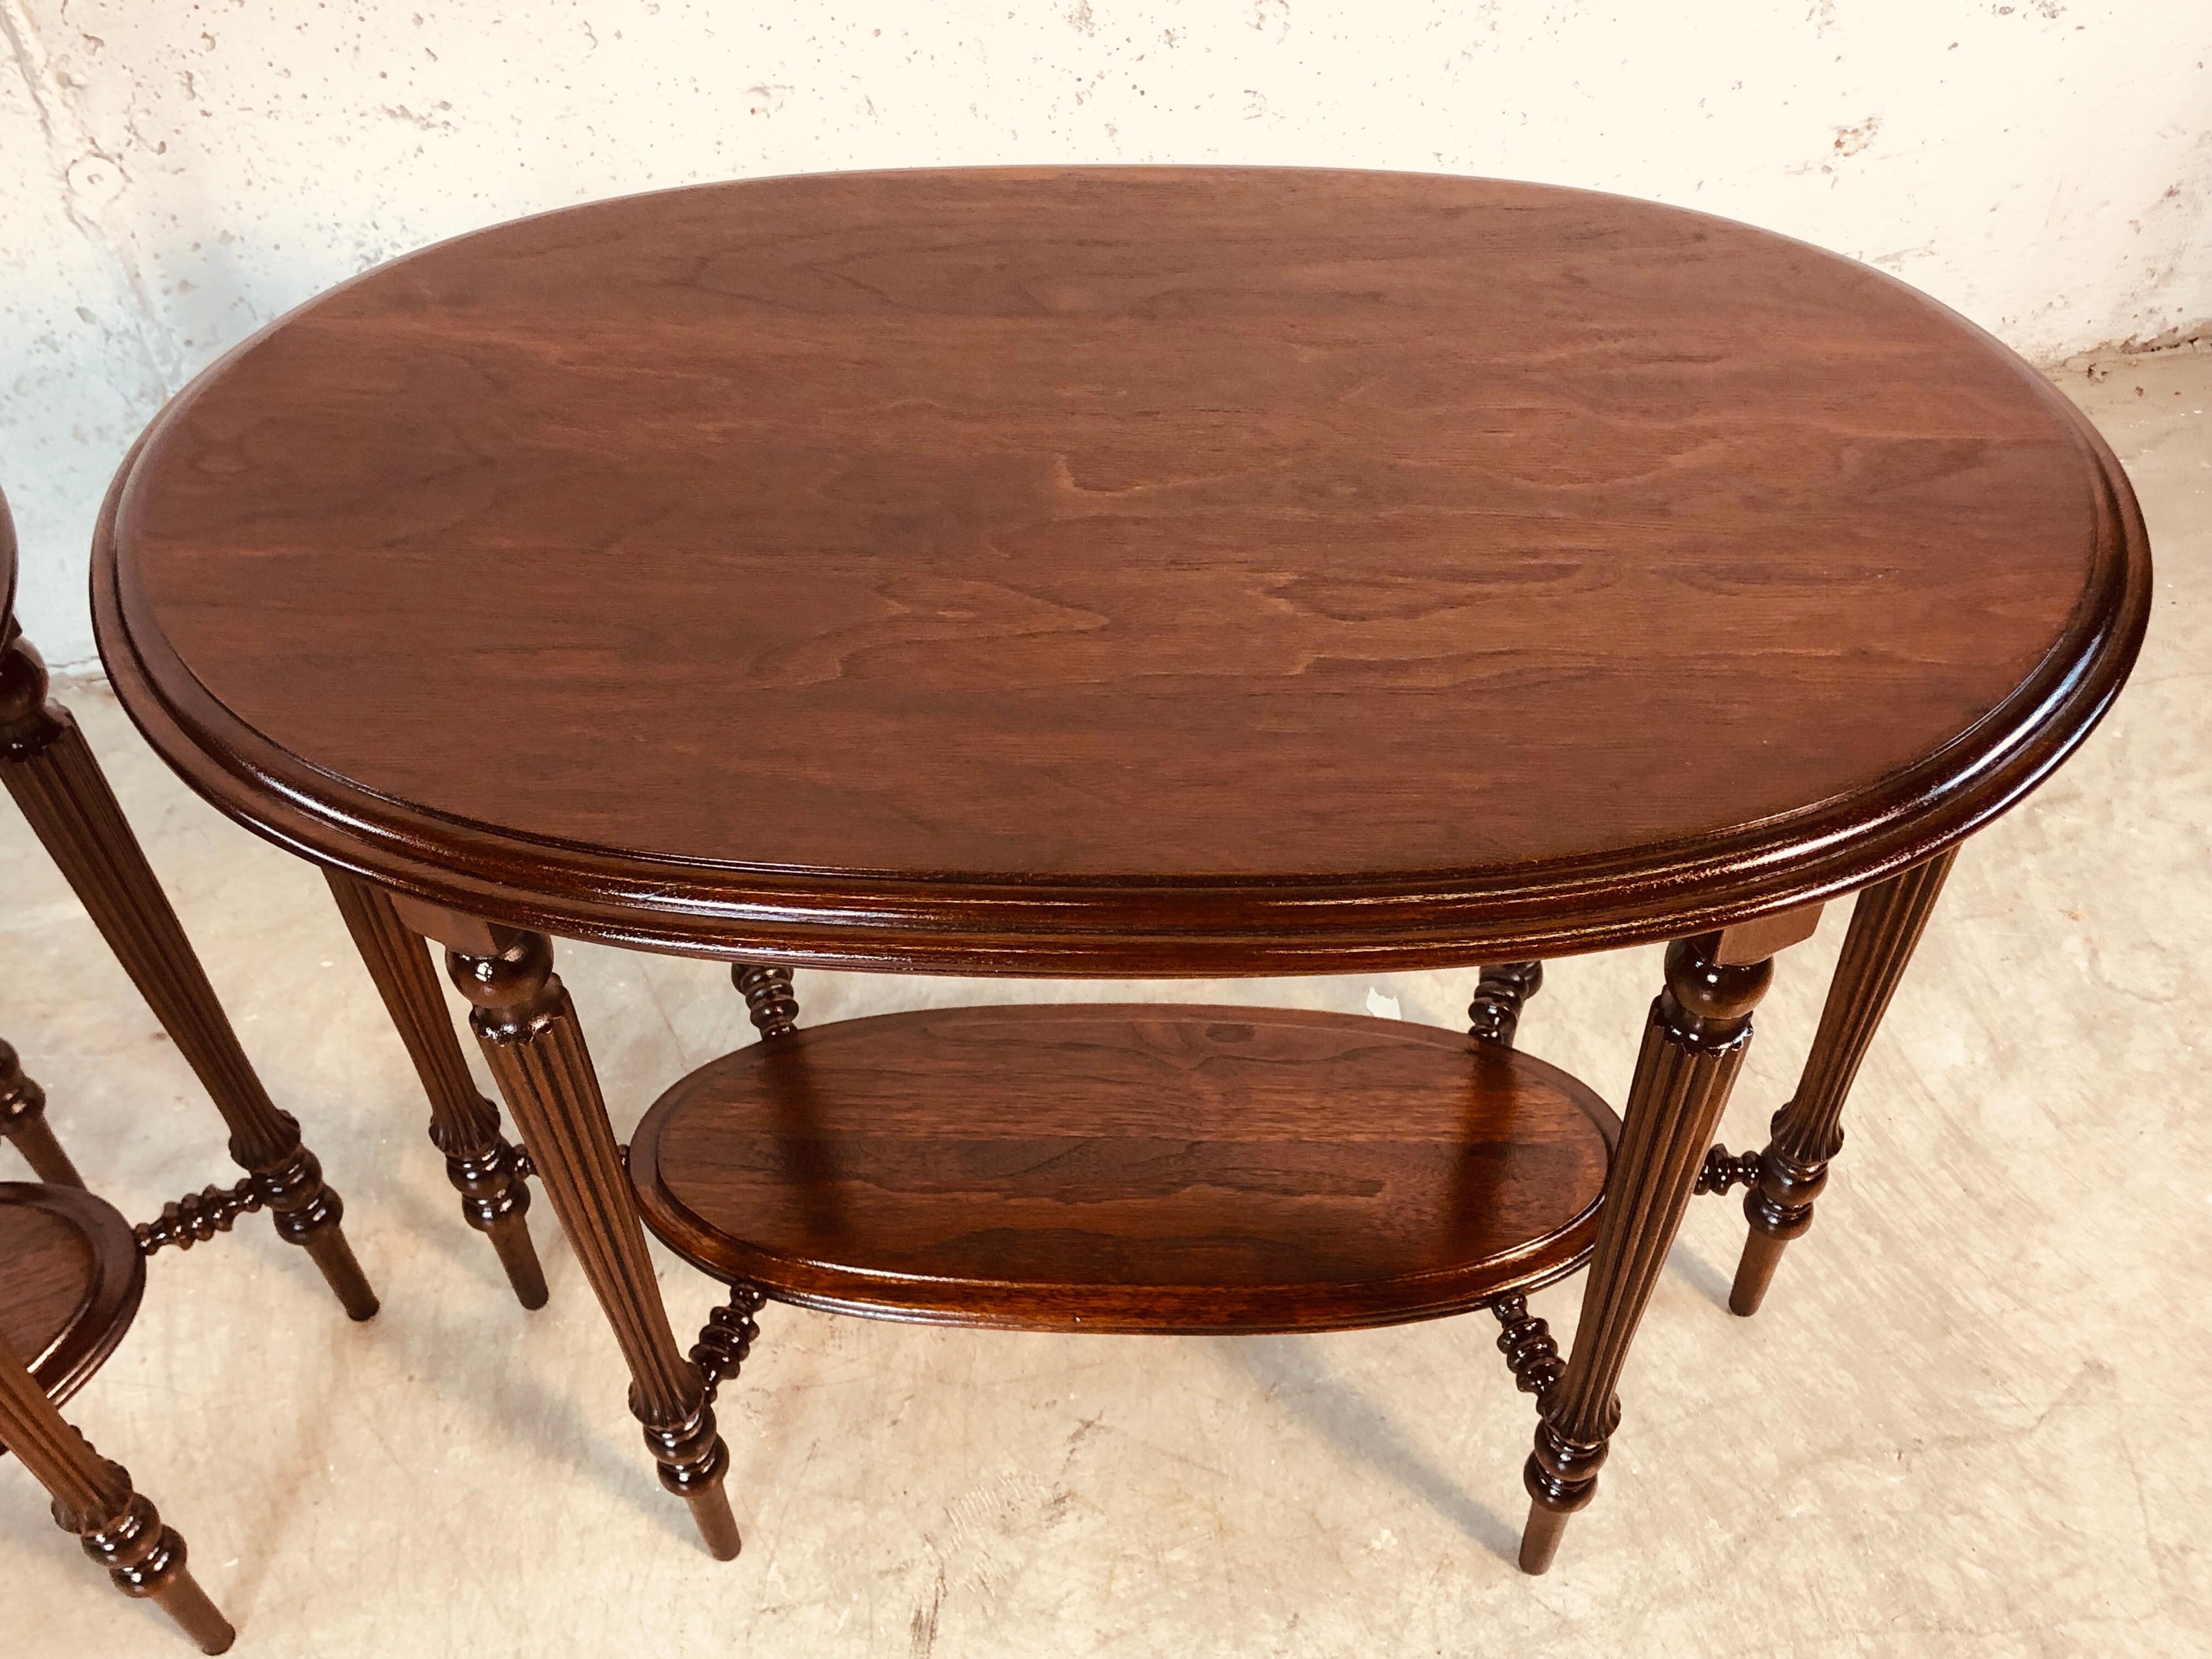 Late Victorian Walnut Oval Side Tables, Pair In Good Condition For Sale In Amherst, NH